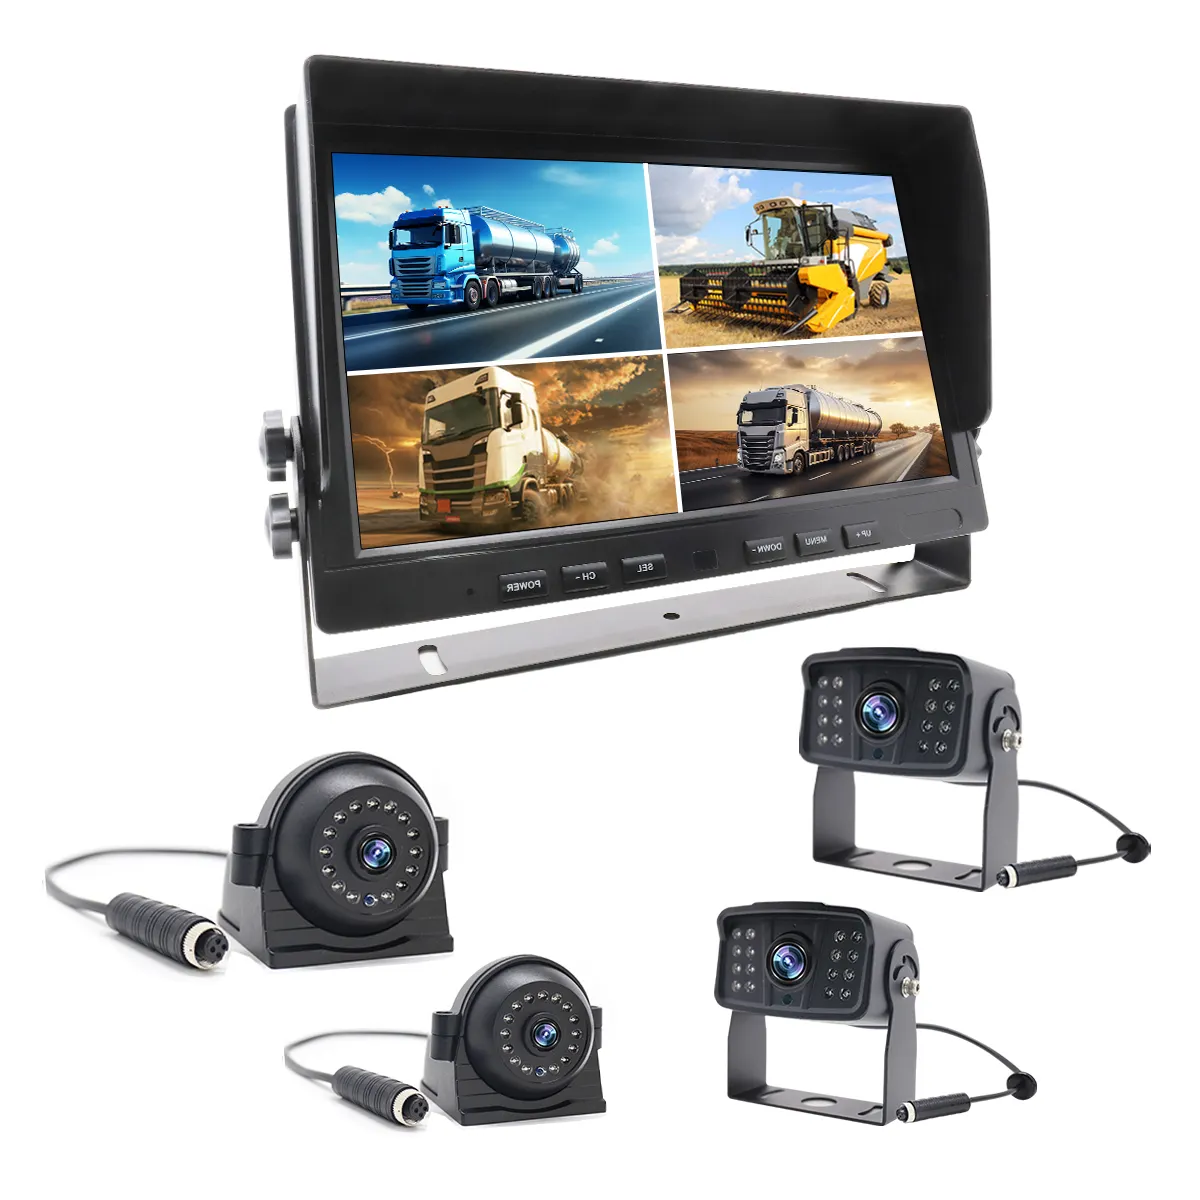 10.1 inch Car Display with Vehicle Camera and Car Security System with AHD DVR Back Up Camera and Car Reversing Aid